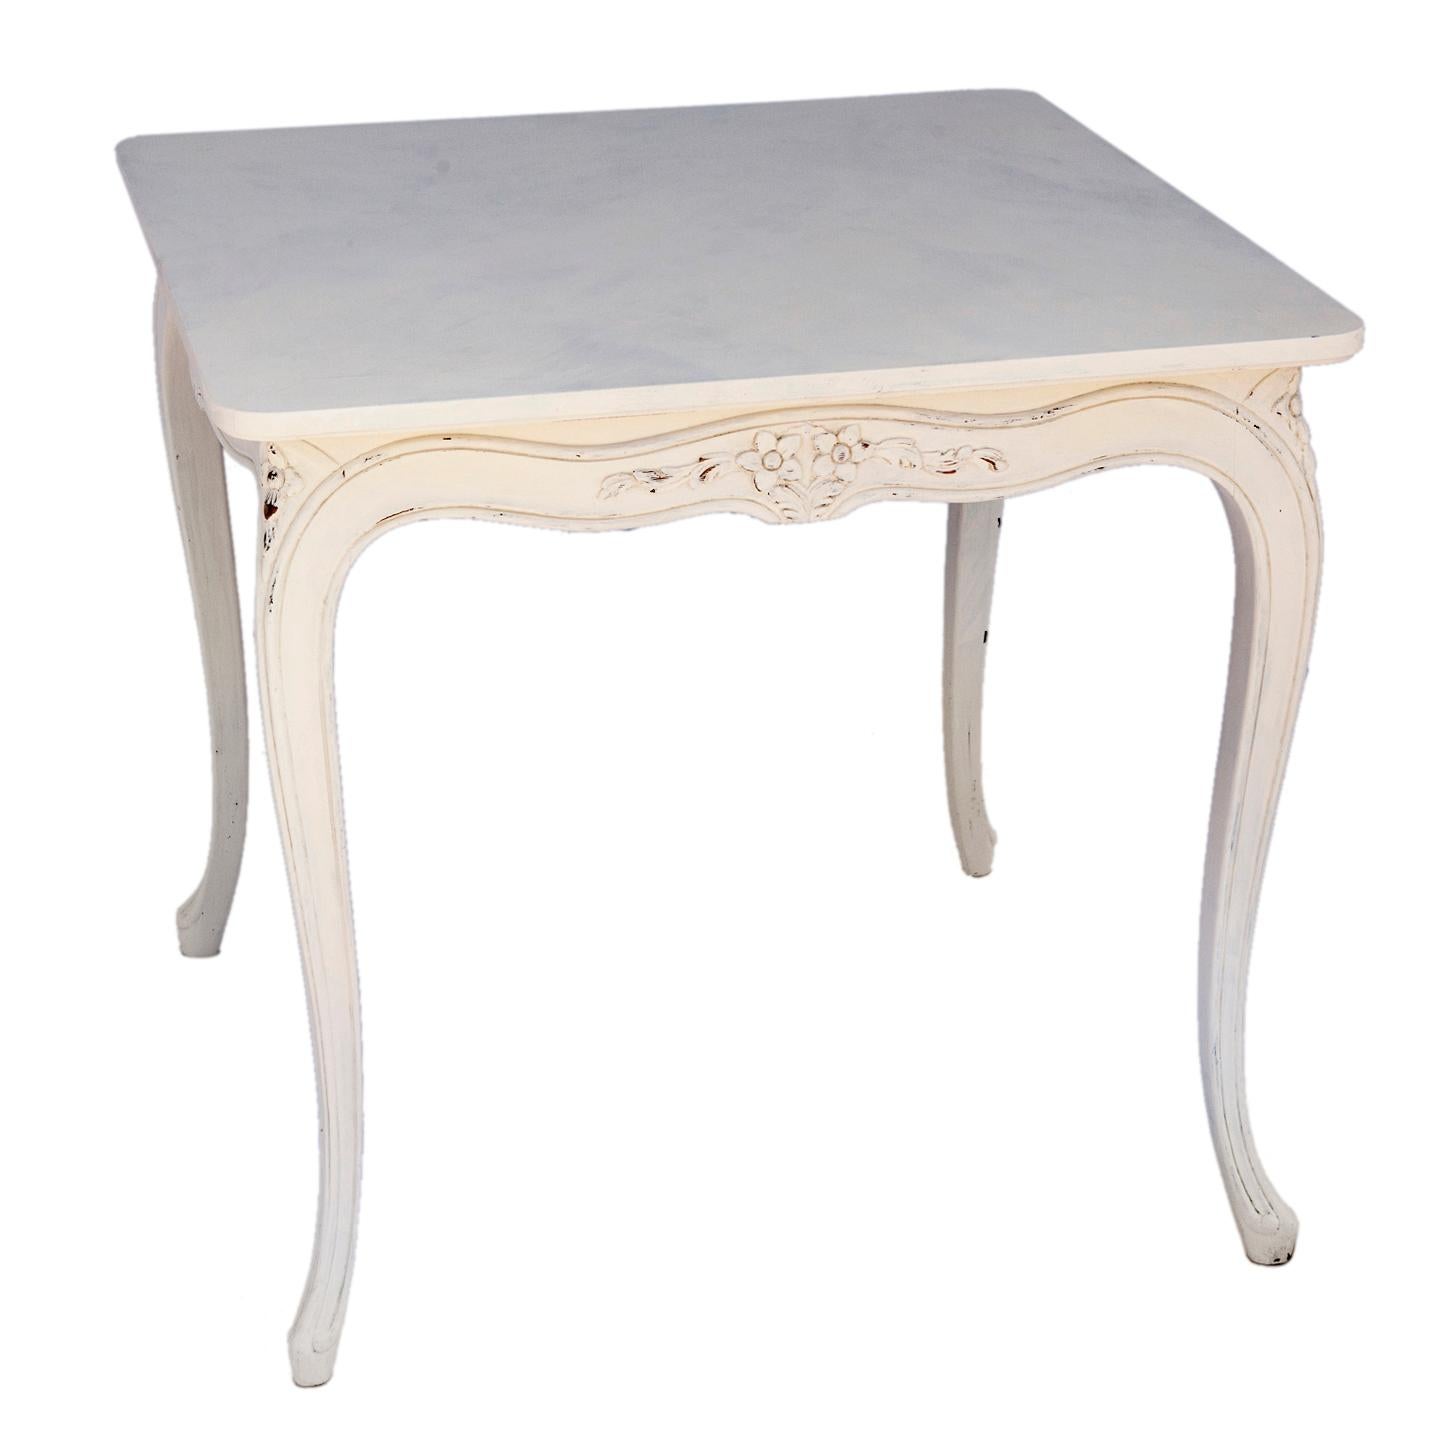 French provincial square card or game table in creamy white finish. Hand carved with decorative apron & carved cabriole legs. 

